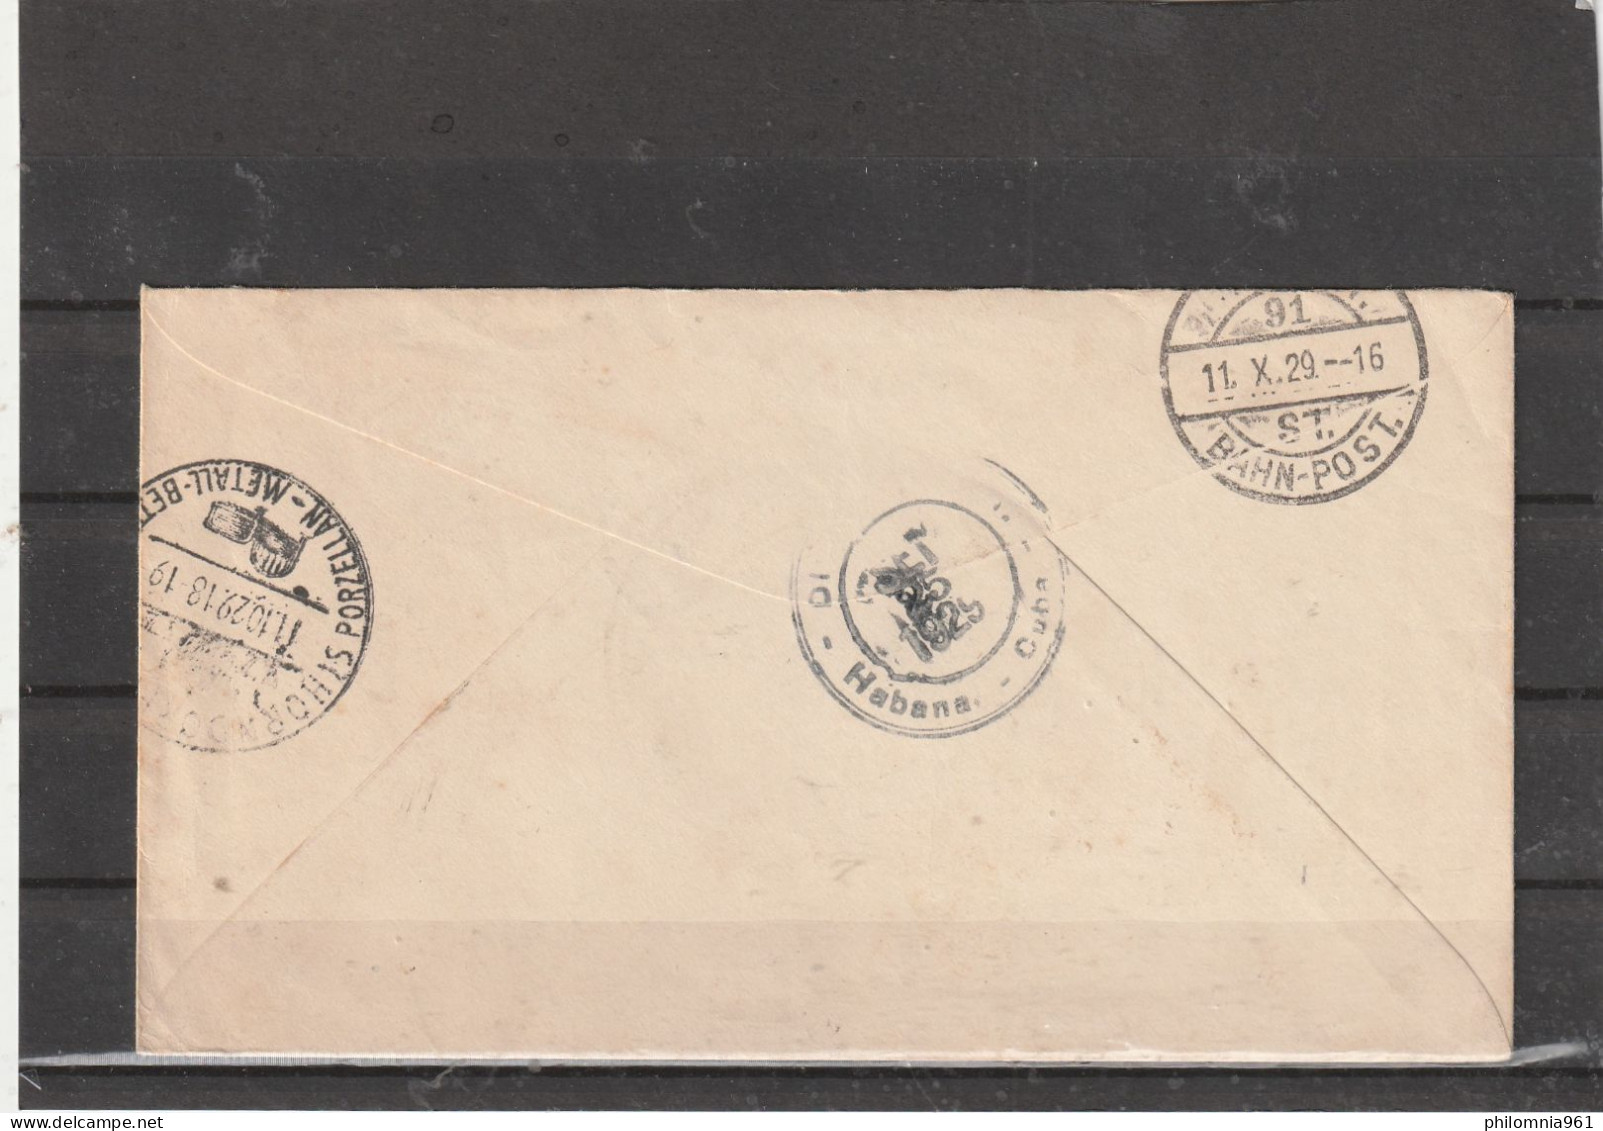 Cuba REGISTERED COVER To Germany 1929 - Covers & Documents